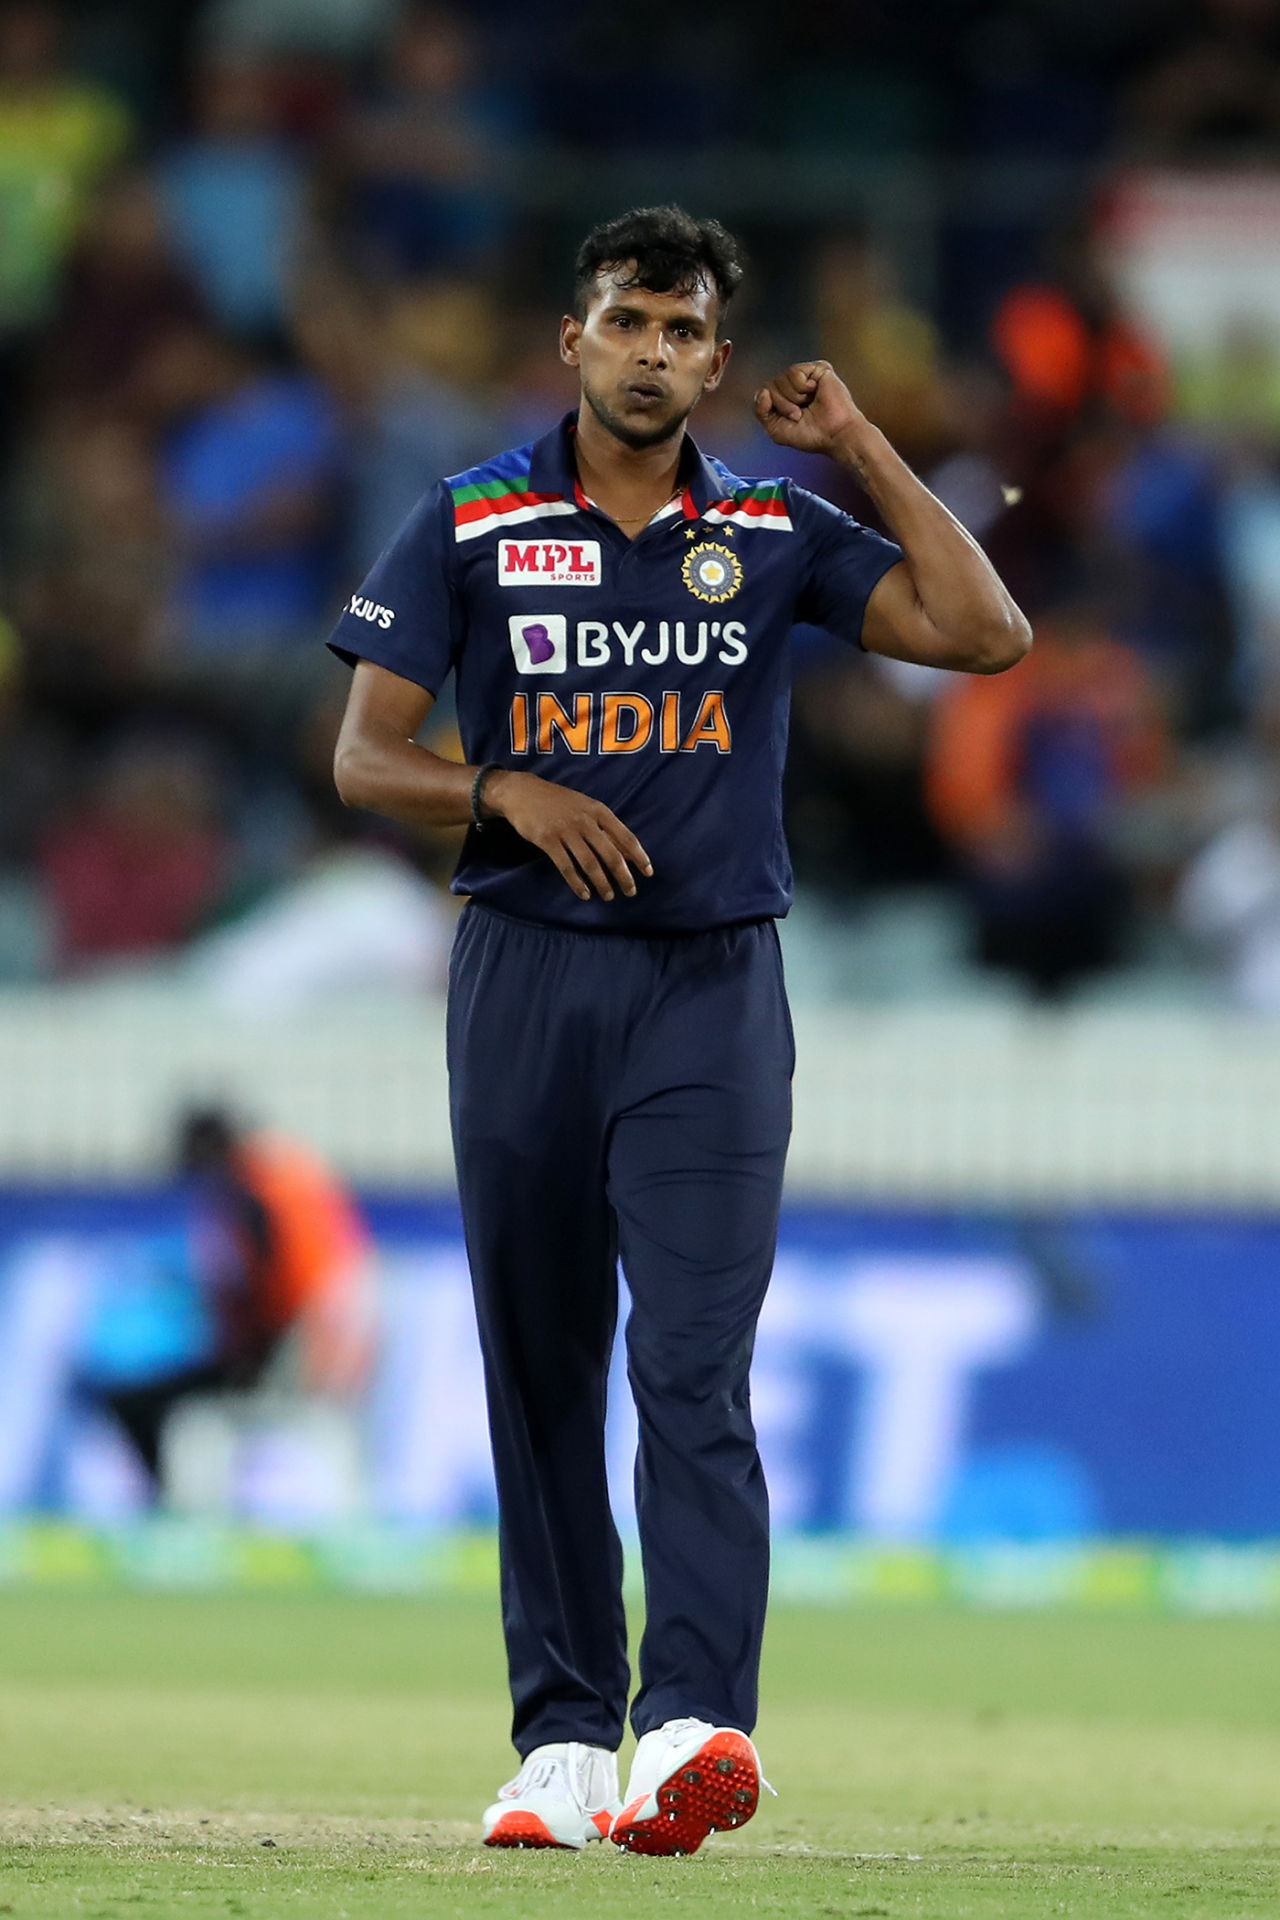 T Natarajan is pumped after taking a wicket, Australia vs India, 1st T20I, Canberra, December 4, 2020